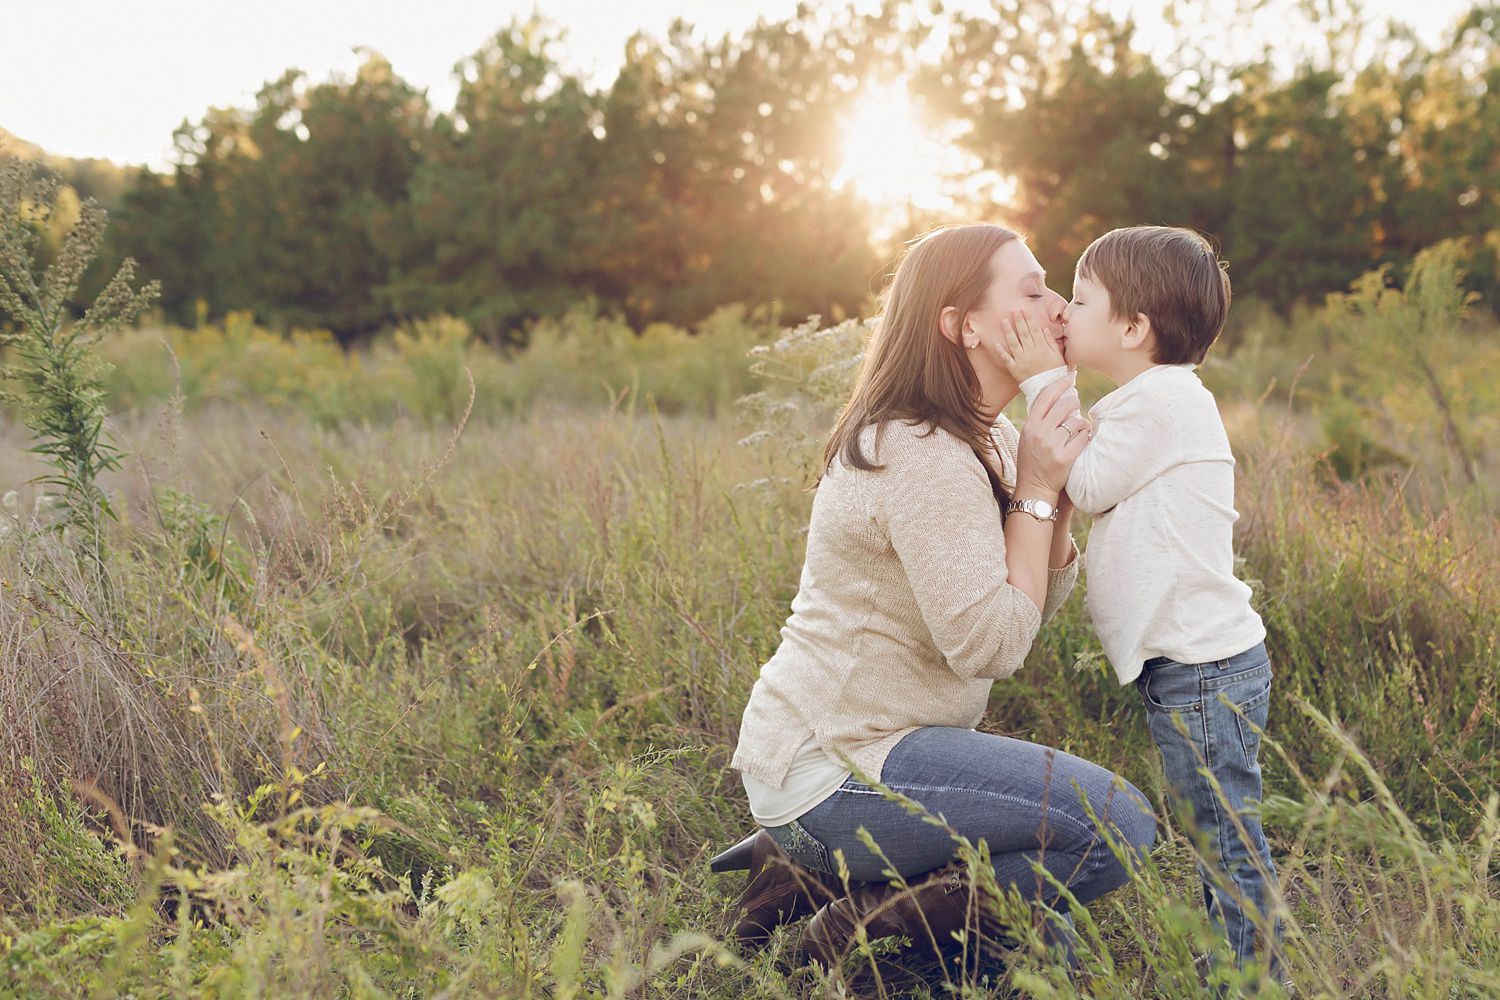  A little boy holds his mother's face to give her a kiss with the sunset behind them. Image taken during a family portrait session by Lily Sophia Photography of Atlanta in the field location.&nbsp; 